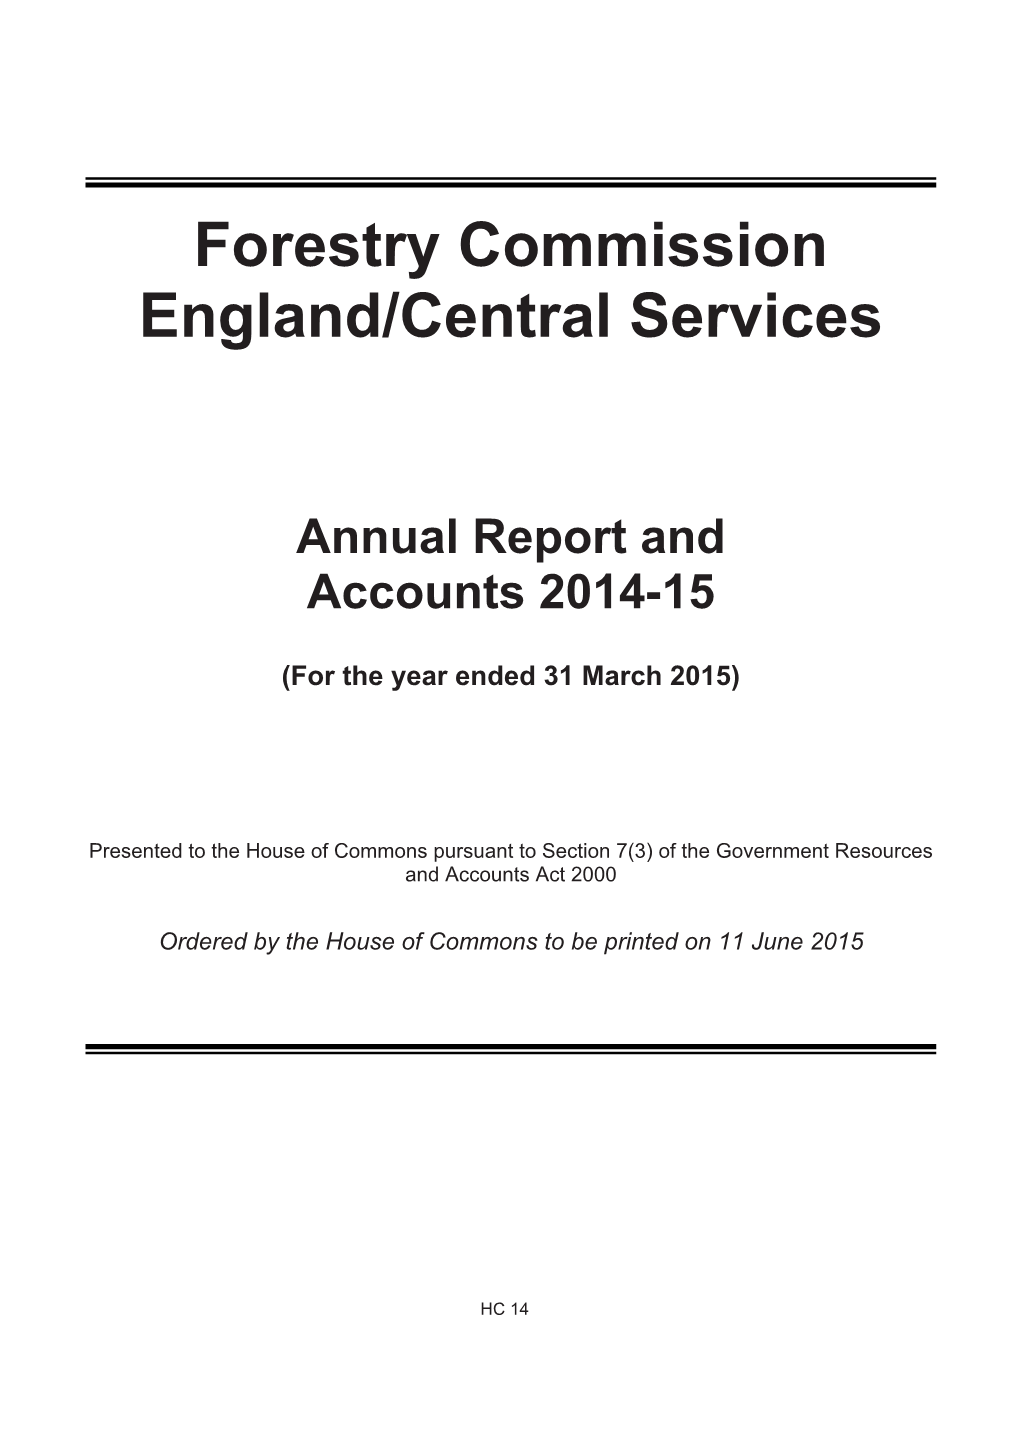 Forestry Commission England/Central Services Annual Accounts 2014-1 5